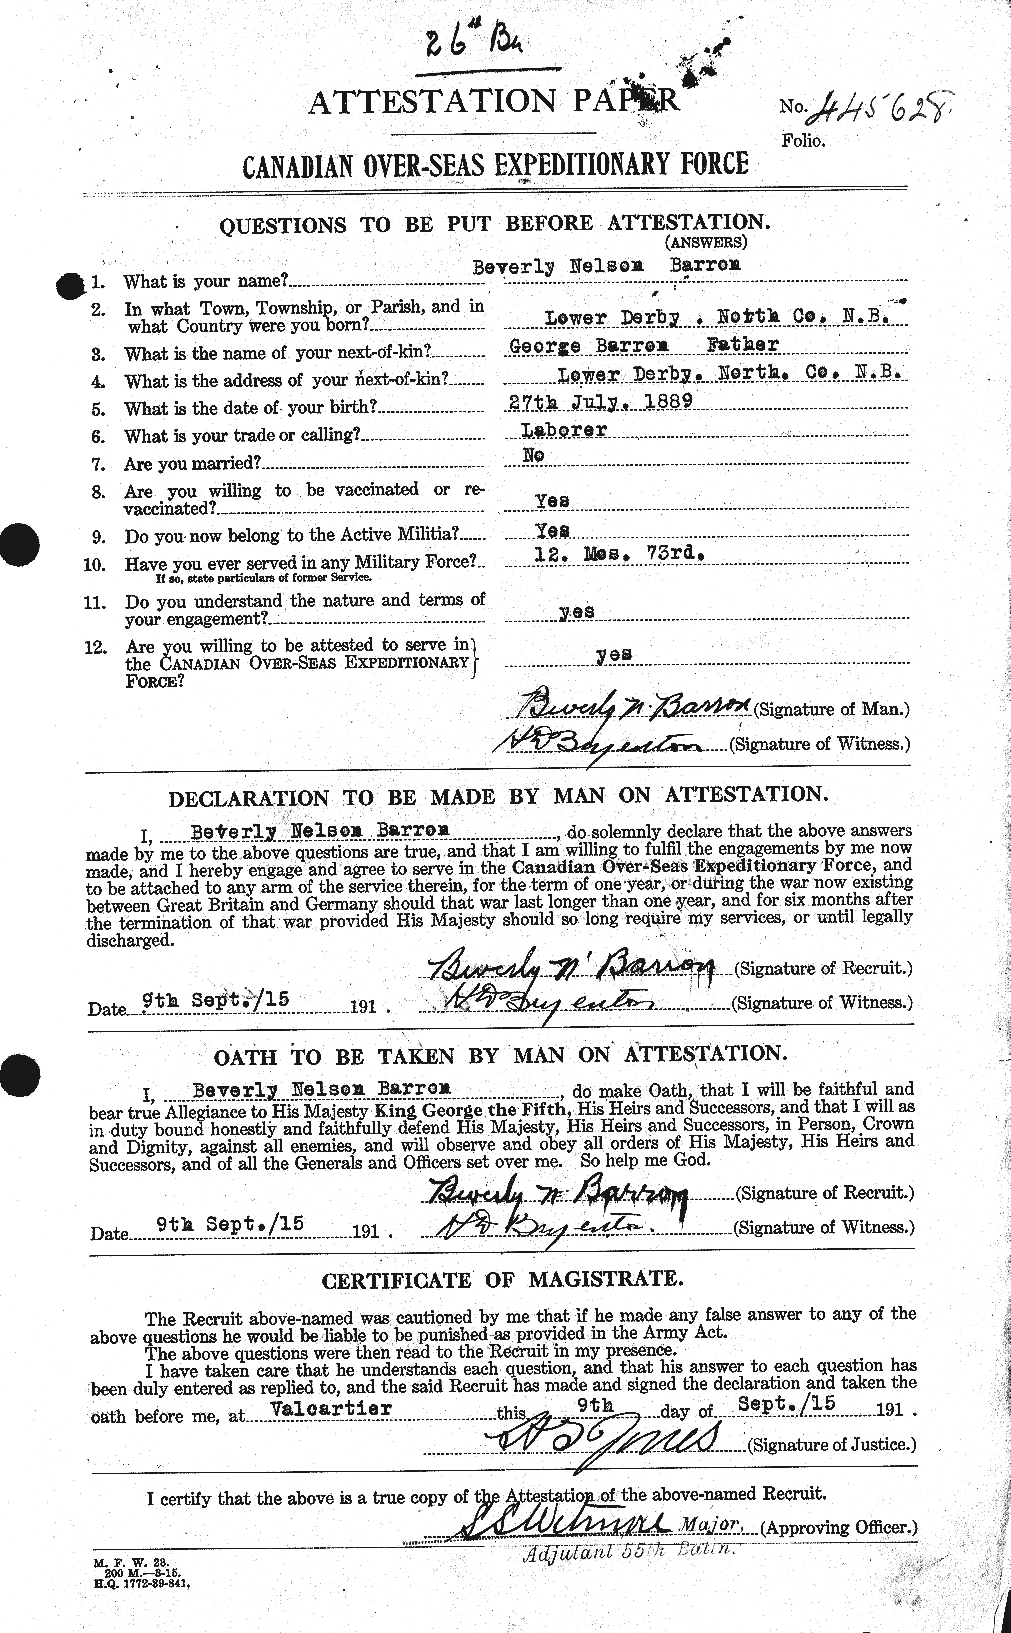 Personnel Records of the First World War - CEF 219944a